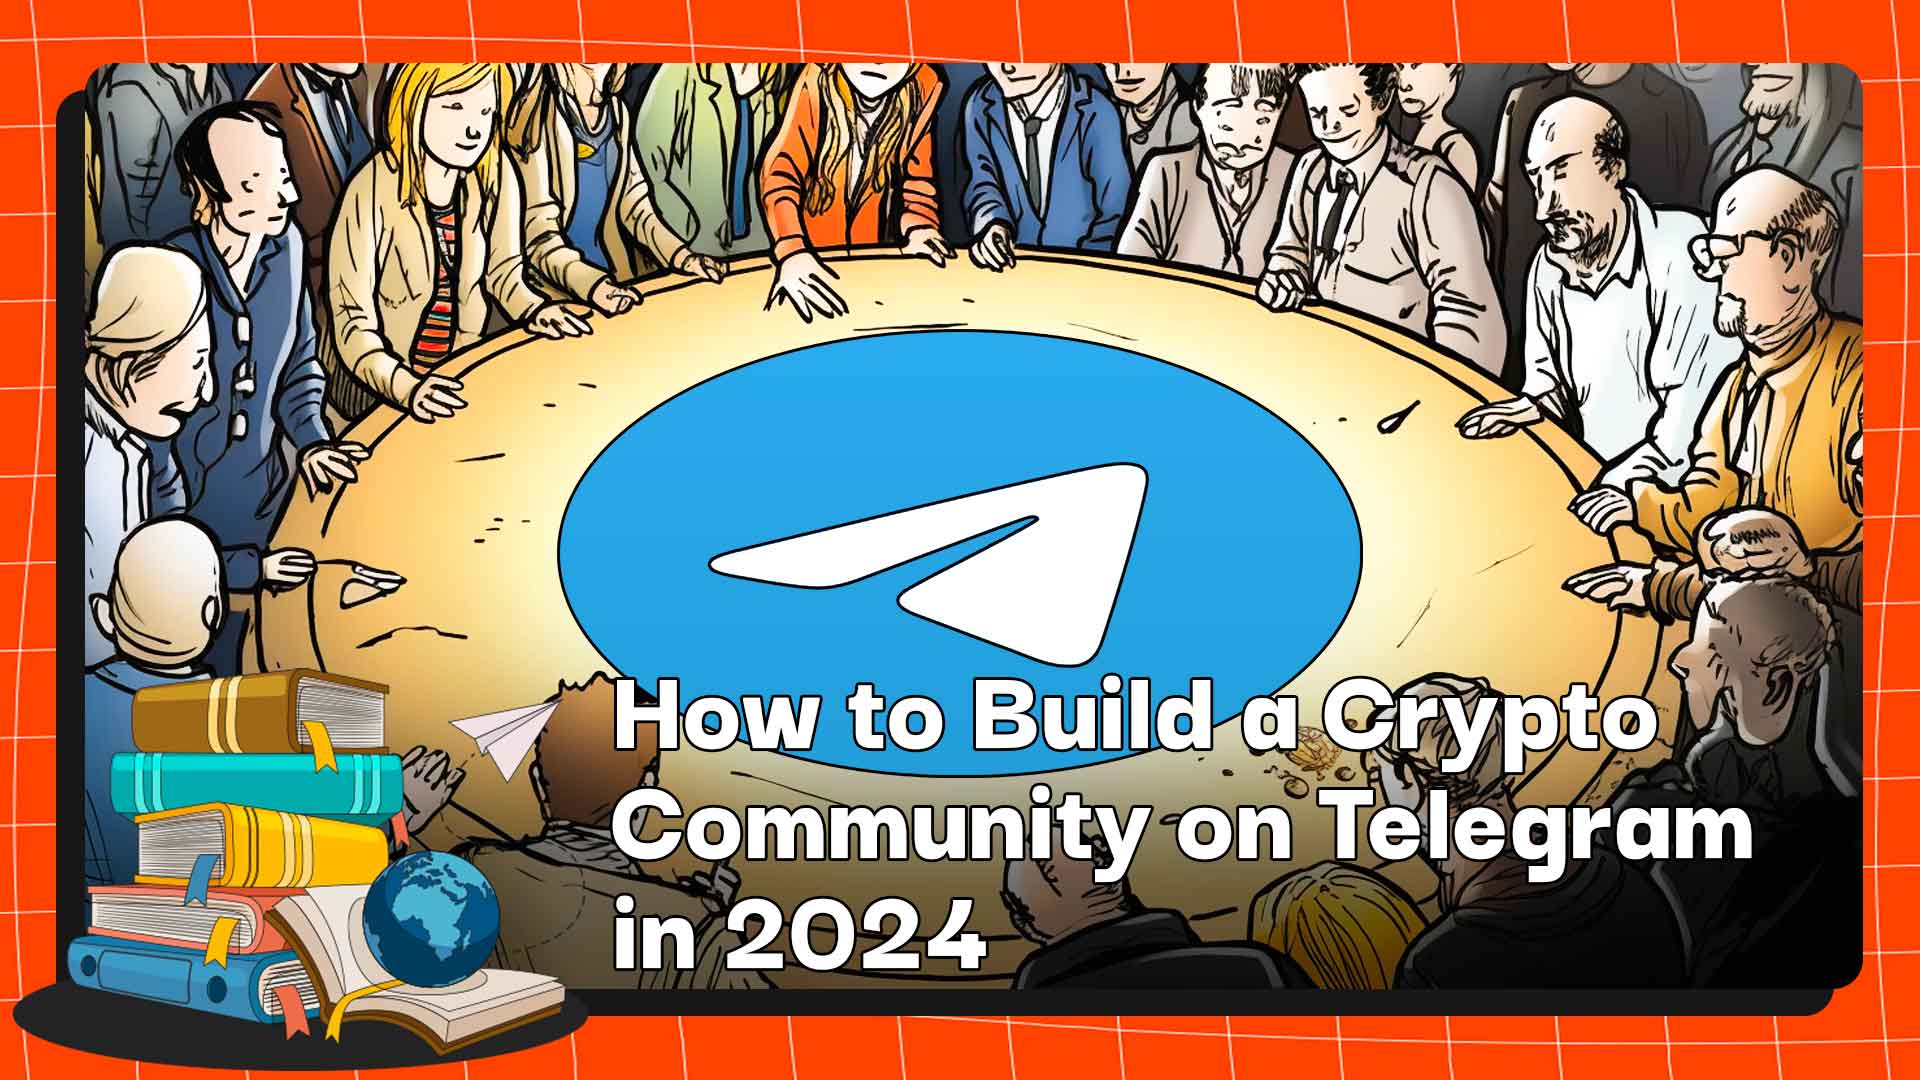 The crowd is gathering around a circle to learn about how to build a Telegram community for a crypto project.